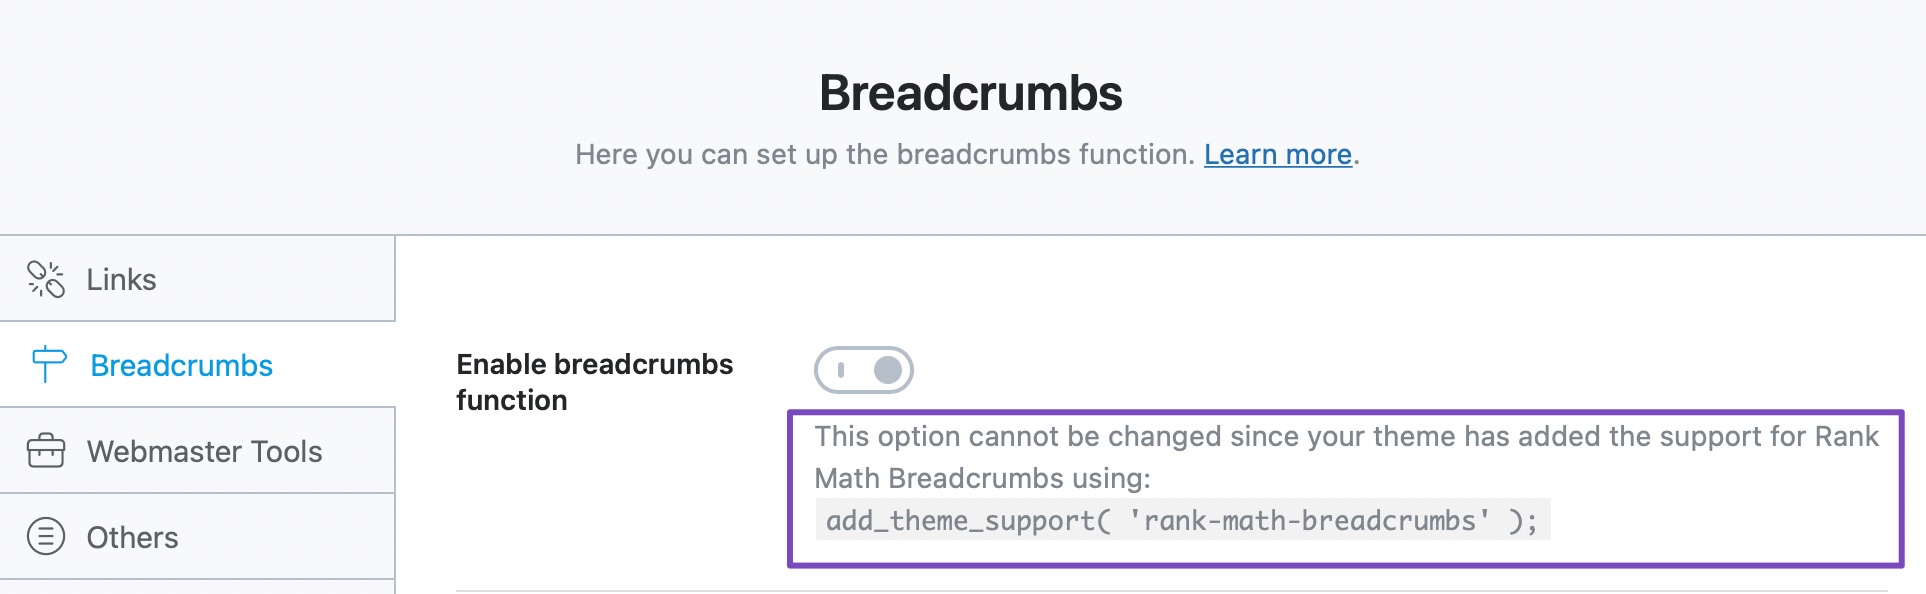 breadcrumbs function not available